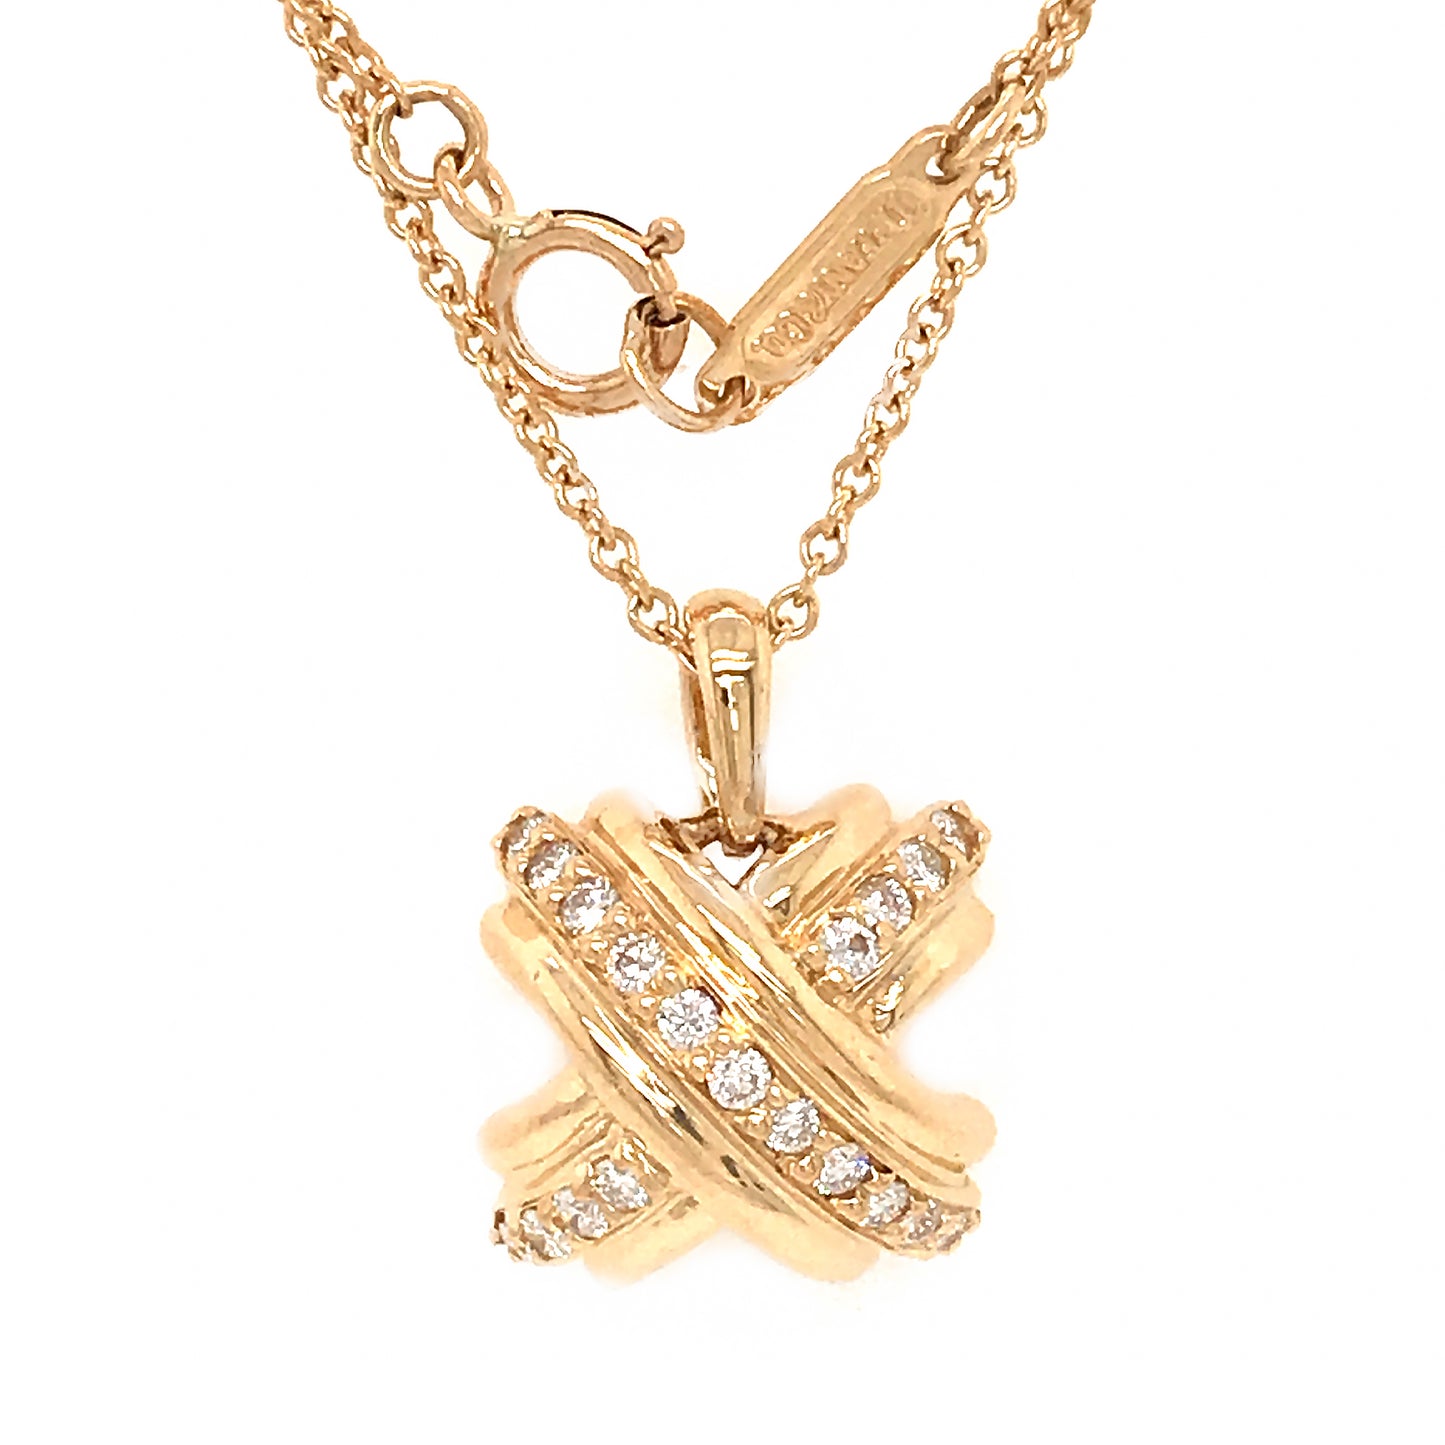 Tiffany & Co. Signature X Pendant Necklace 18K Yellow Gold with Diamonds  Yellow gold 22585519